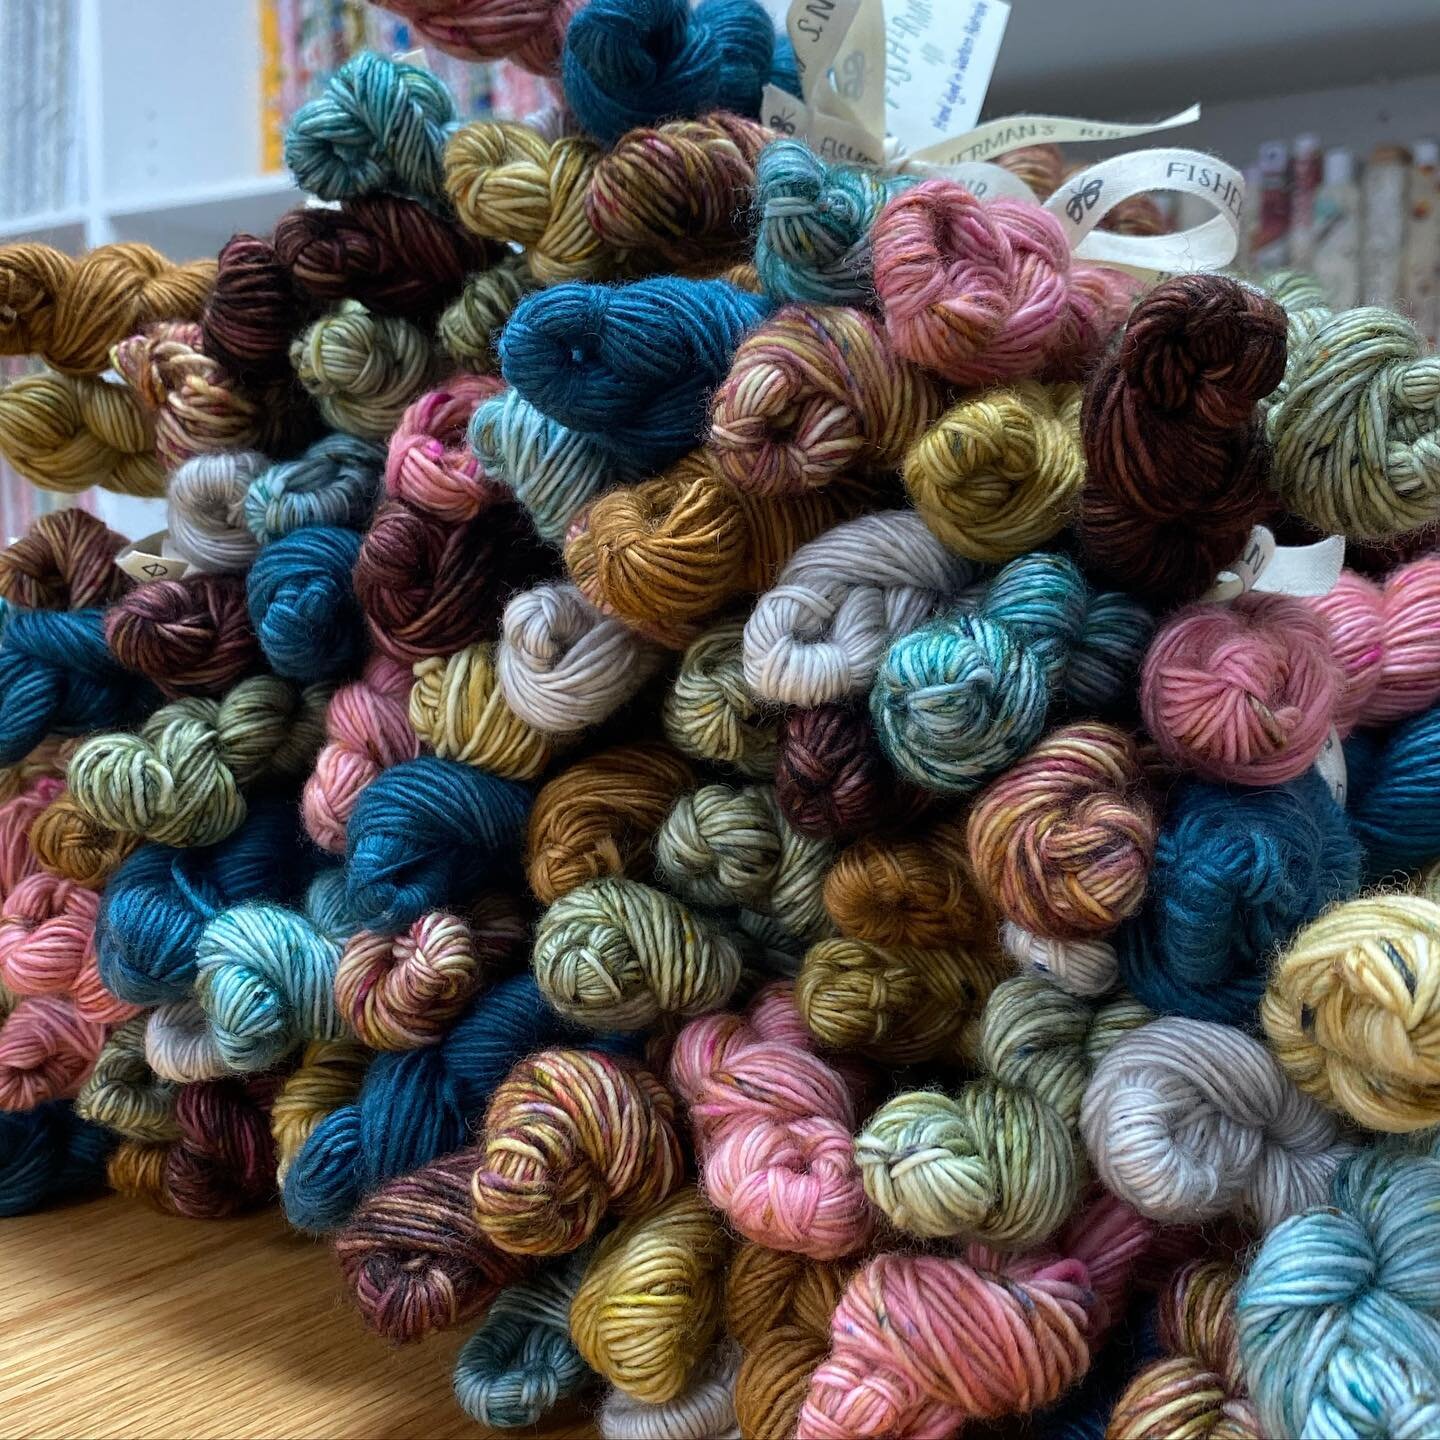 I have just received more kits for the Cotton Rose Flower scarf made from @fishermansrib yarn.  A few more treasures arrived as well they are simply gorgeous 😍 some mixed little ones as well some new 100g skeins. #cottonrosesw#cottonrose#cotton_rose